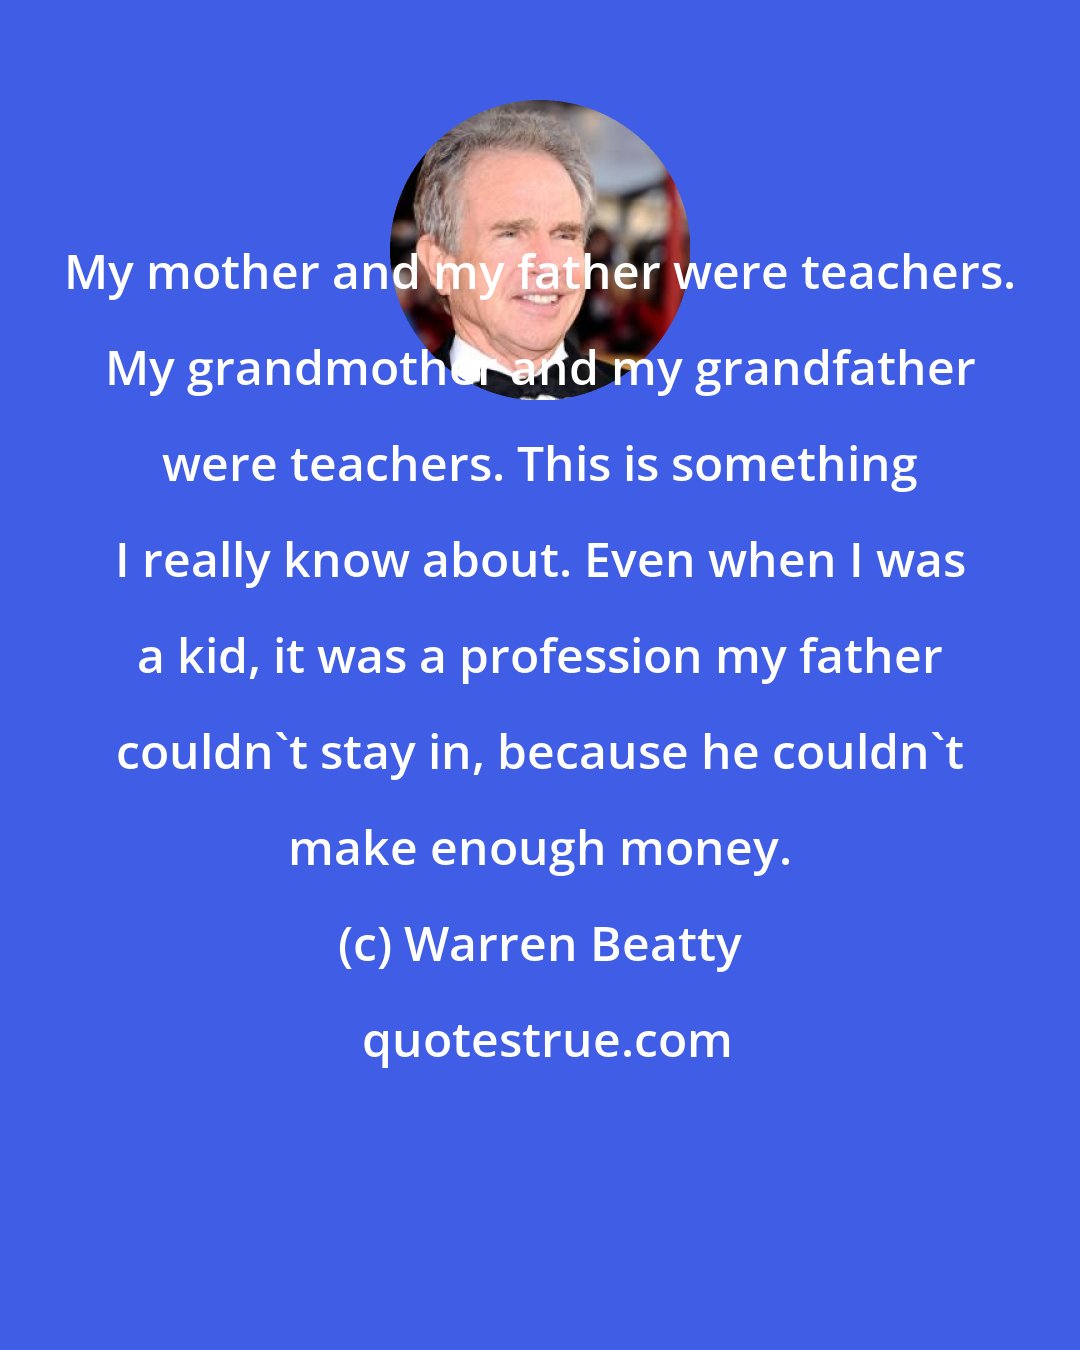 Warren Beatty: My mother and my father were teachers. My grandmother and my grandfather were teachers. This is something I really know about. Even when I was a kid, it was a profession my father couldn't stay in, because he couldn't make enough money.